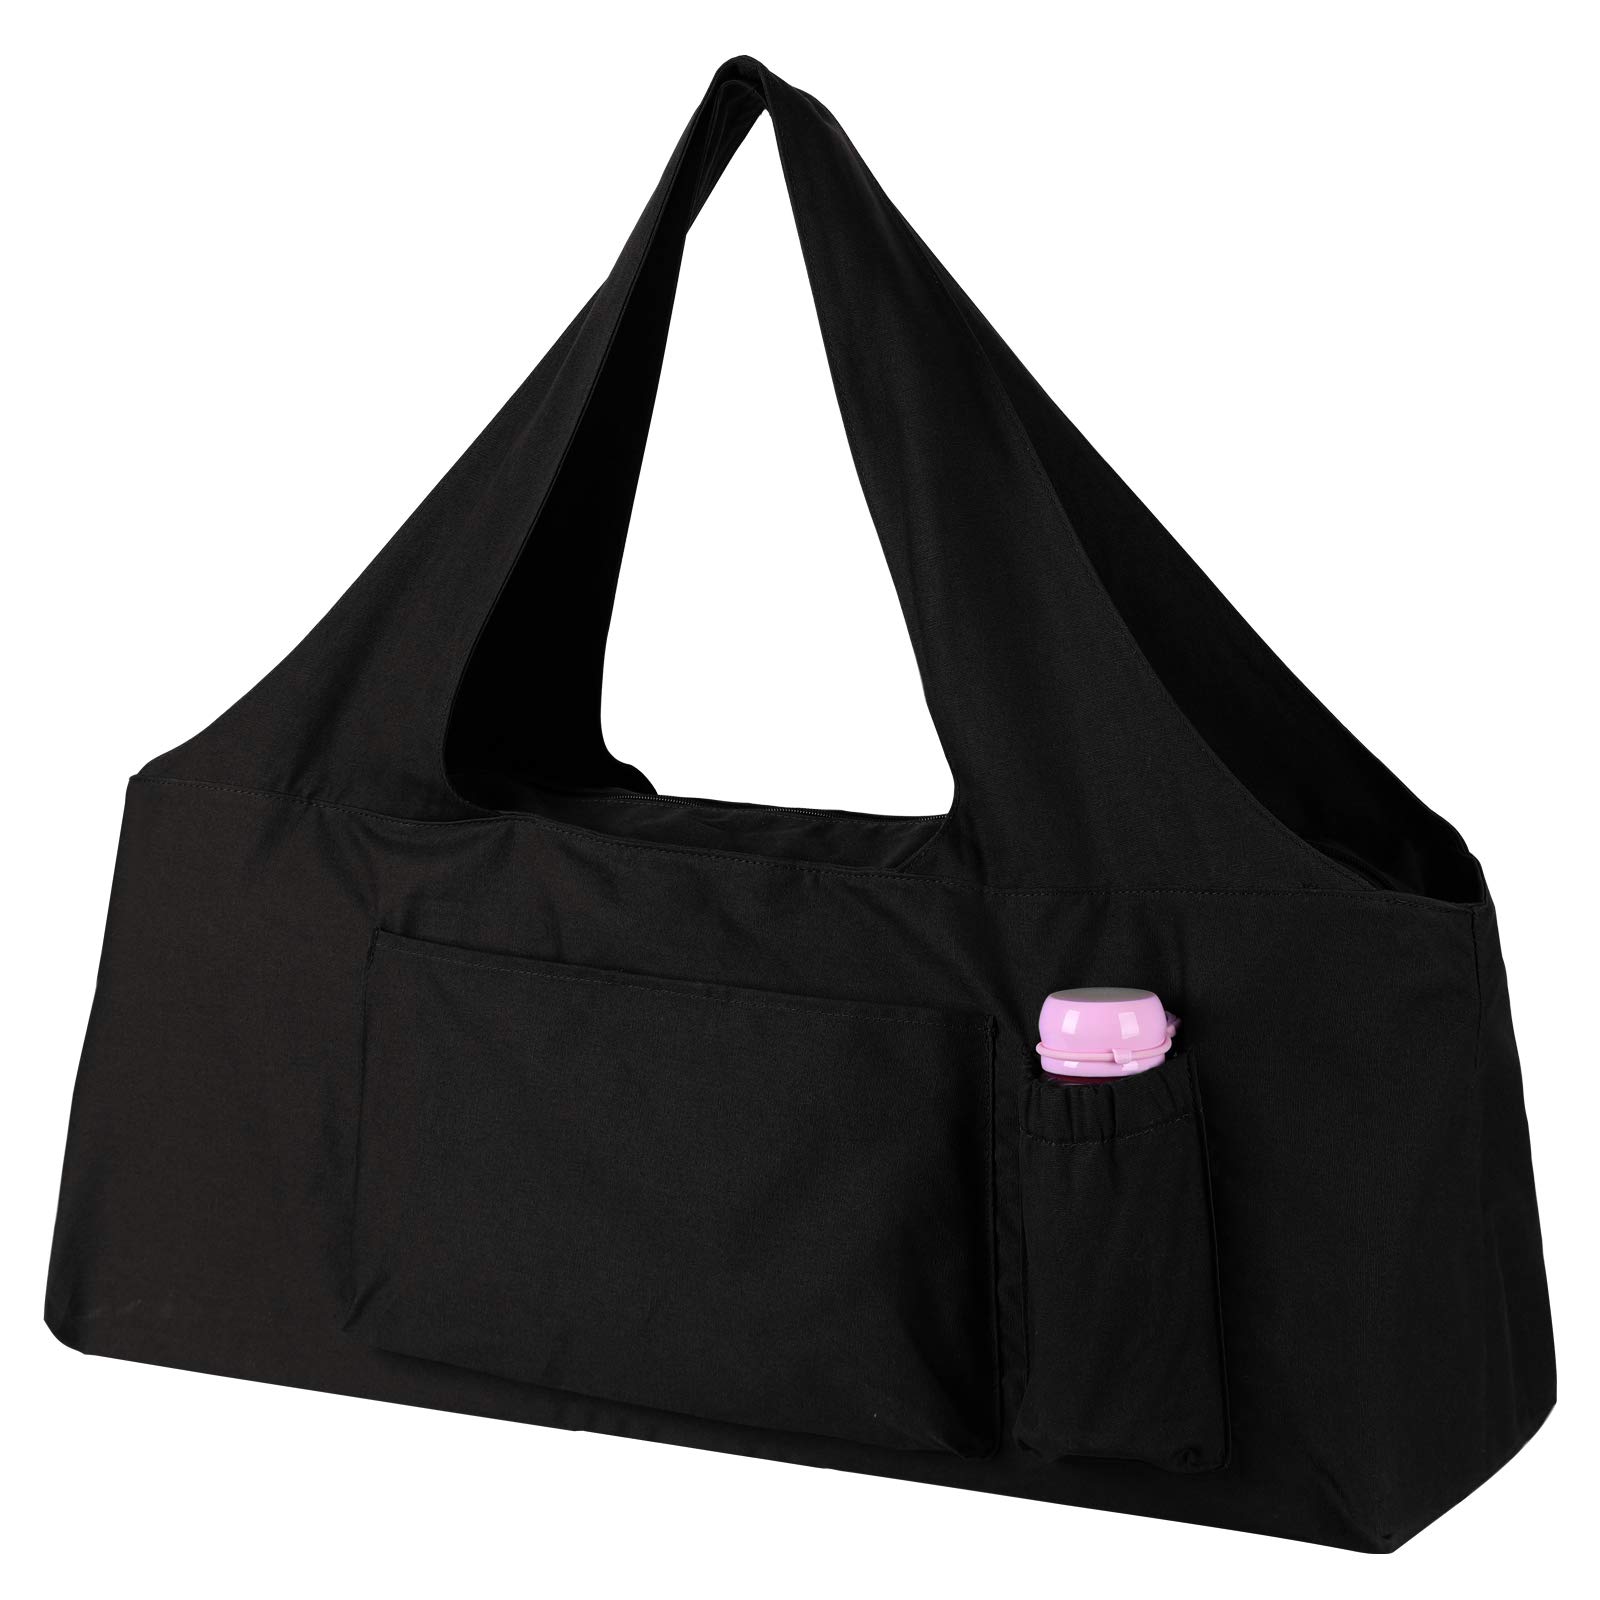  KUAK Yoga Bags for Women with Top Yoga Mat Carrier